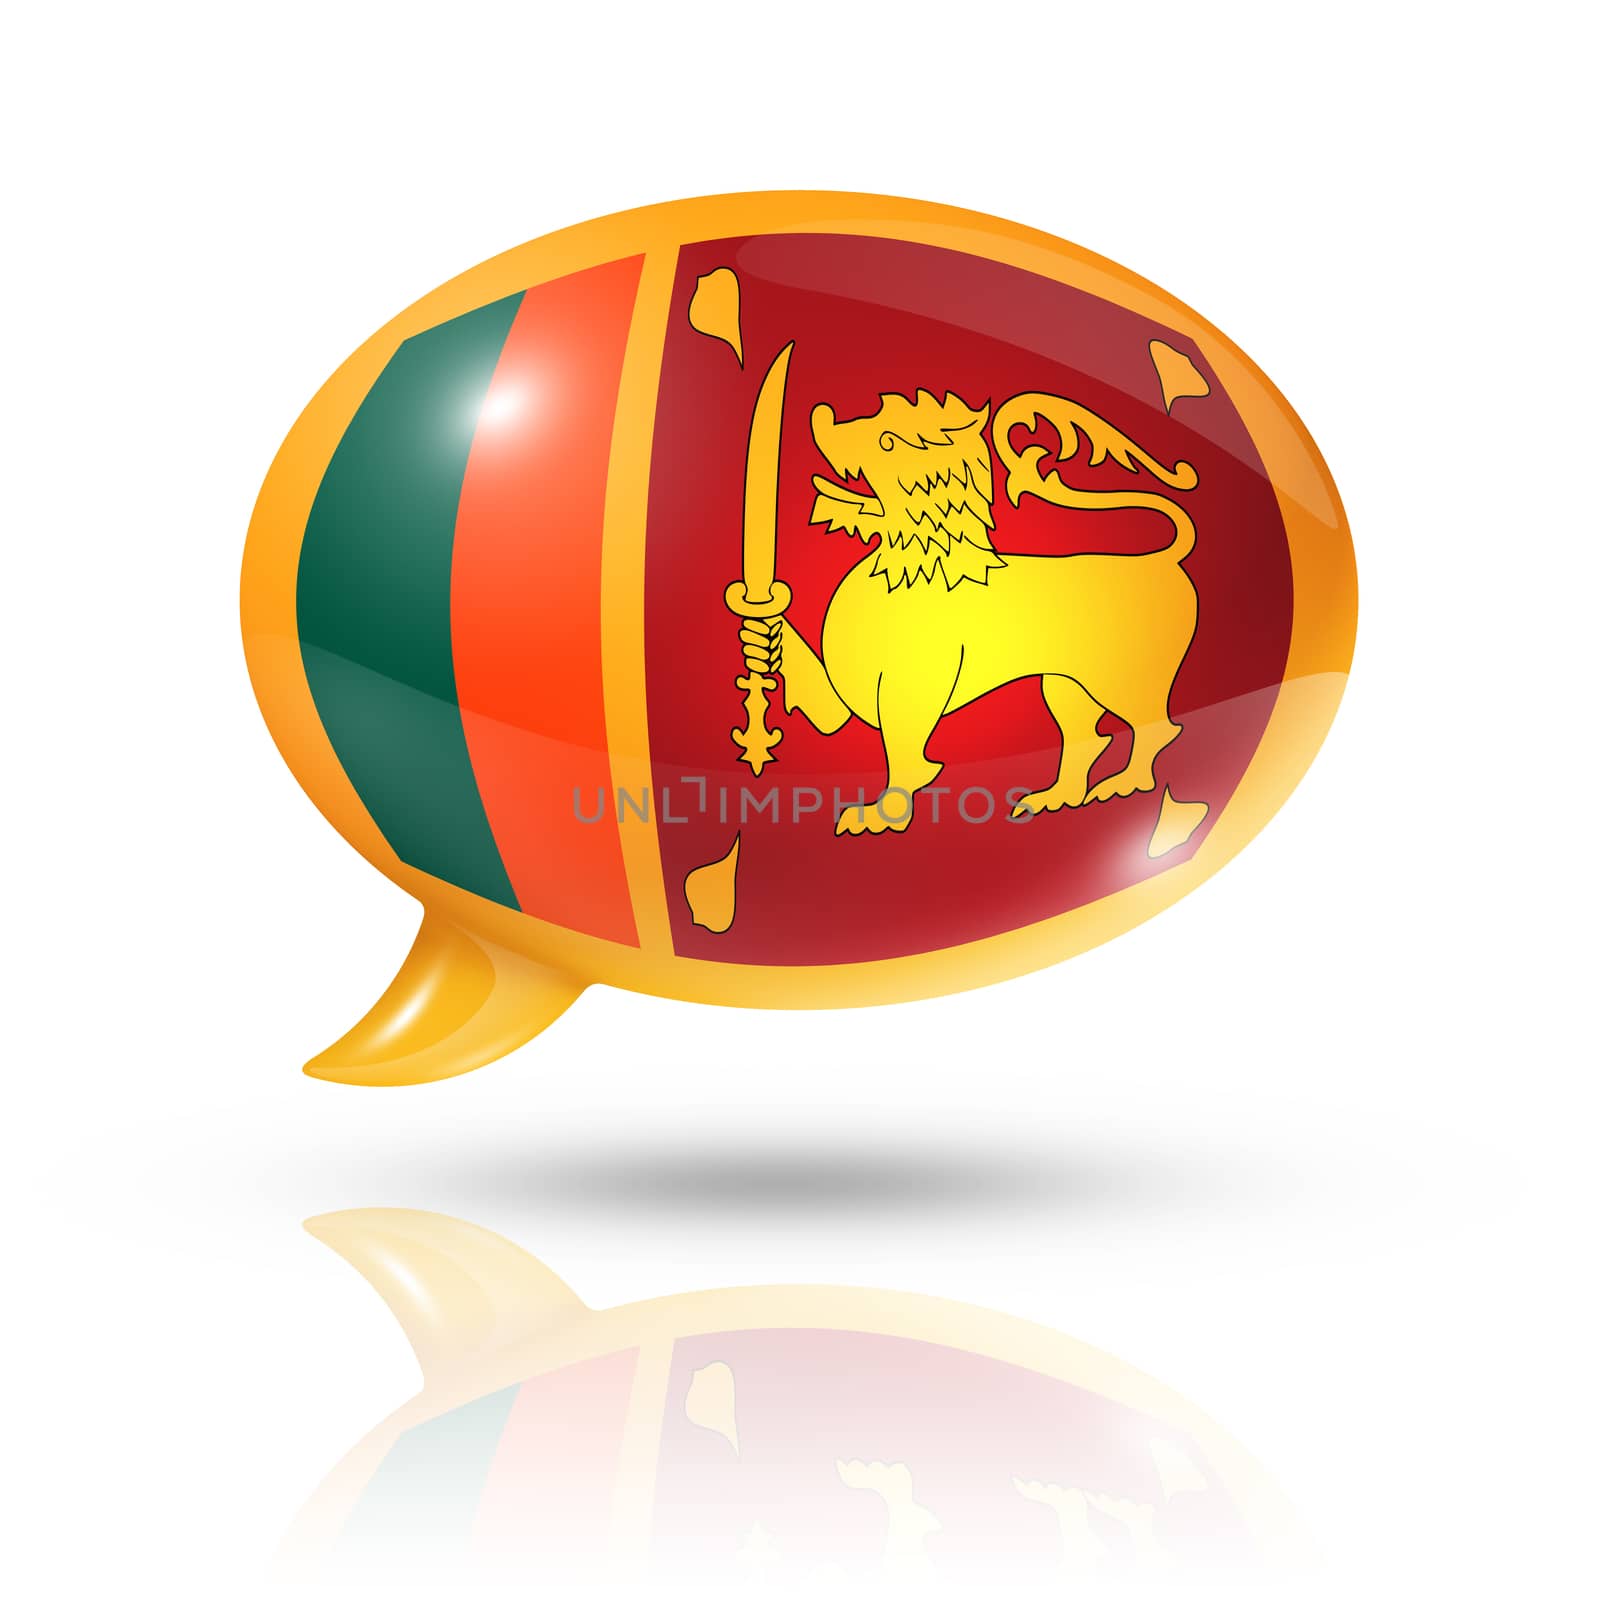 three dimensional Sri Lanka flag in a speech bubble isolated on white with clipping path